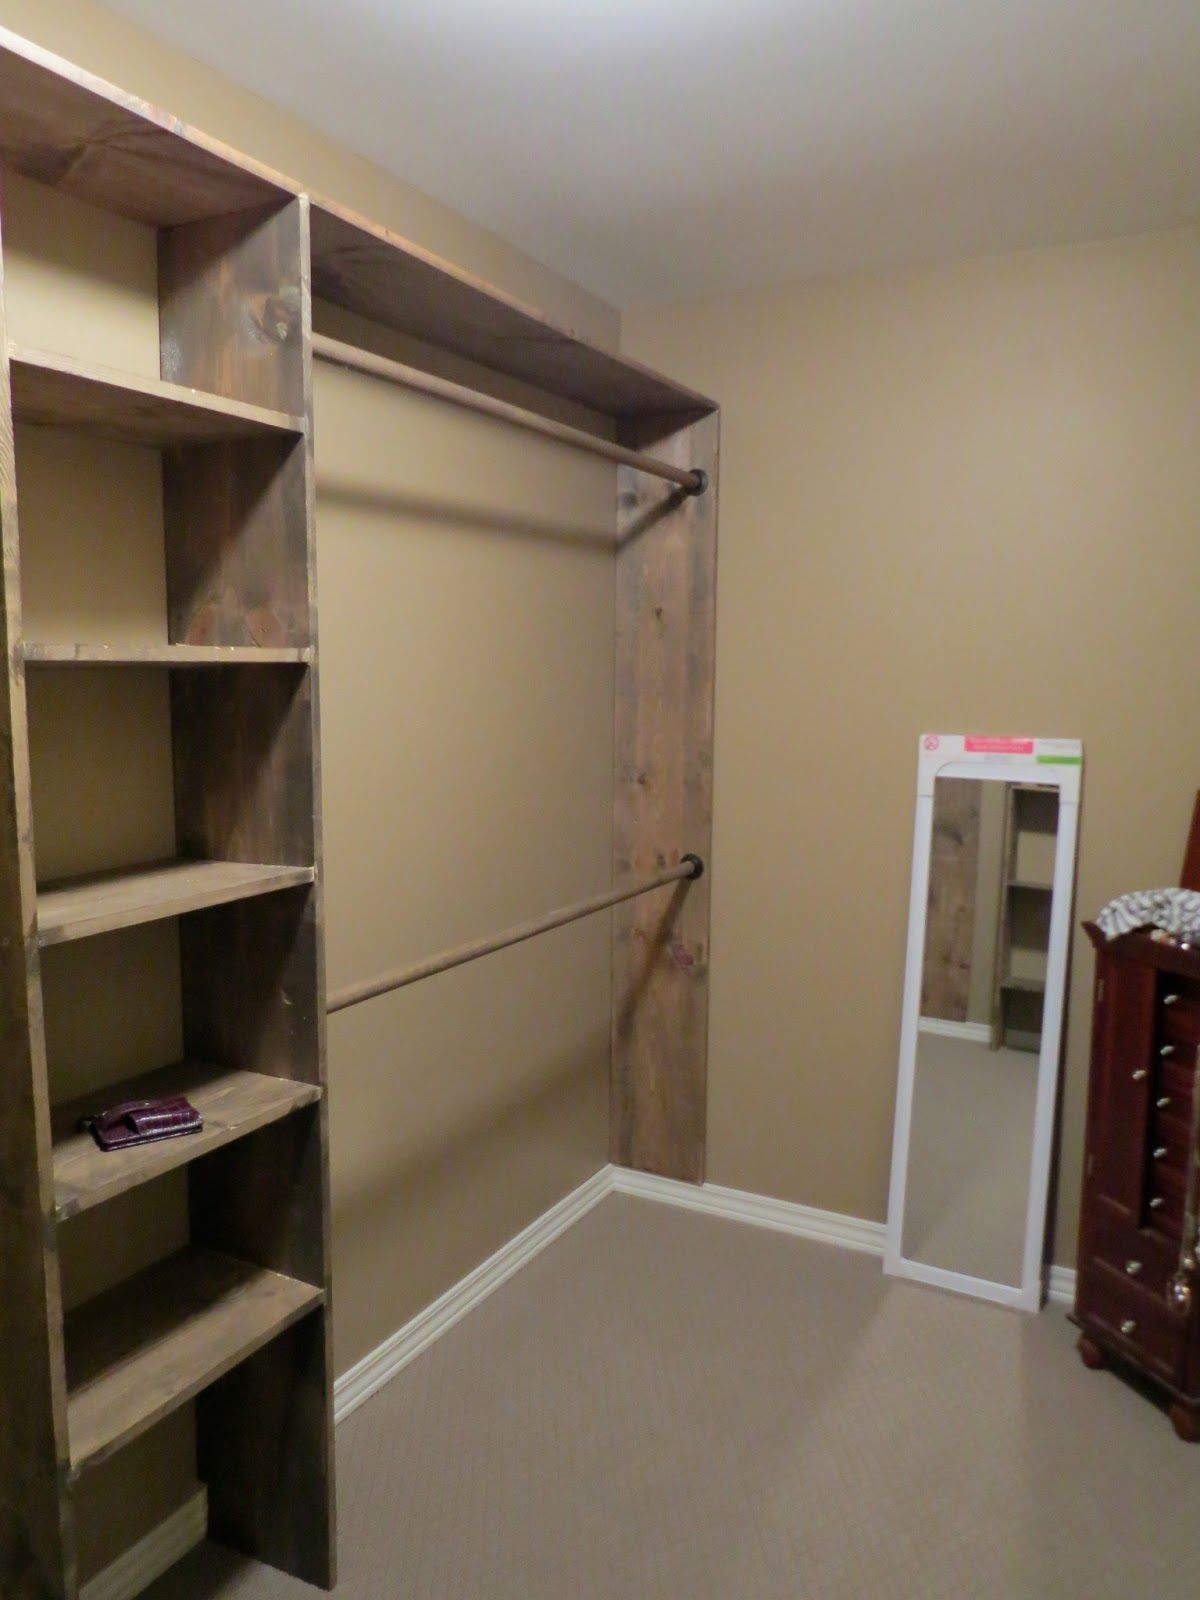 Lets Just Build a House!: Walk-in closets: No more living out of laundry baskets!